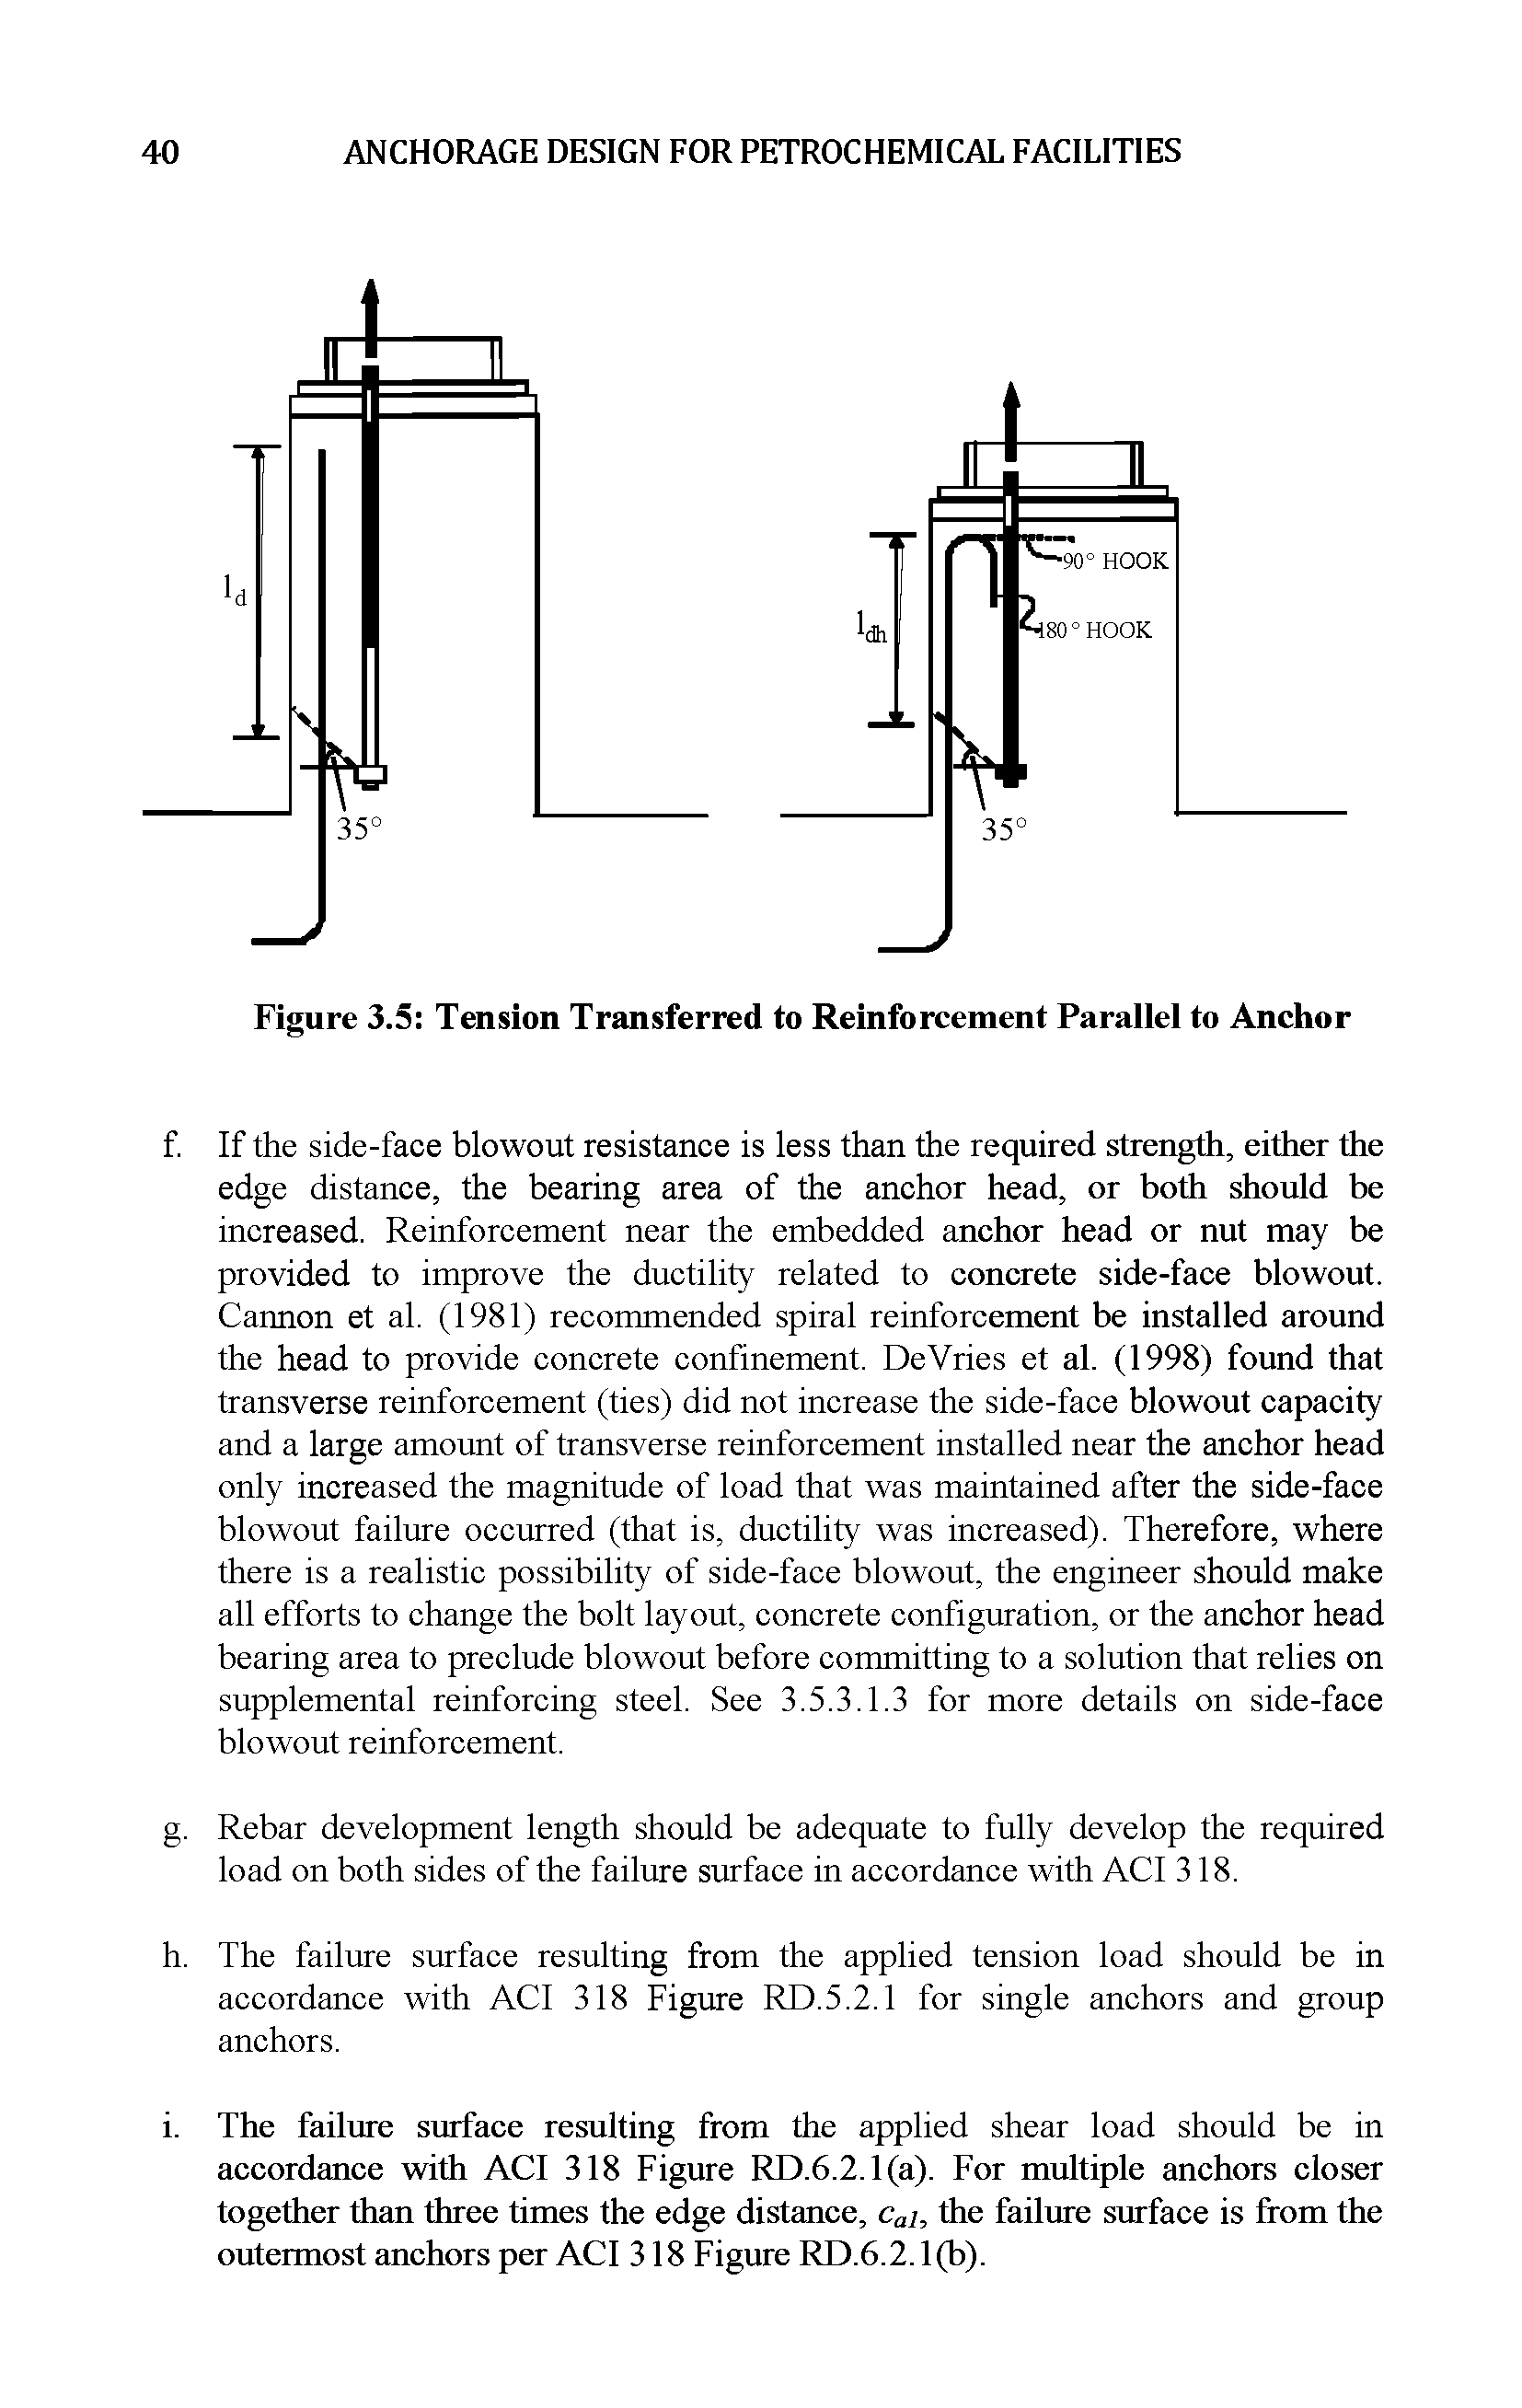 Figure 3.5 Tension Transferred to Reinforcement Paraiiei to Anchor...